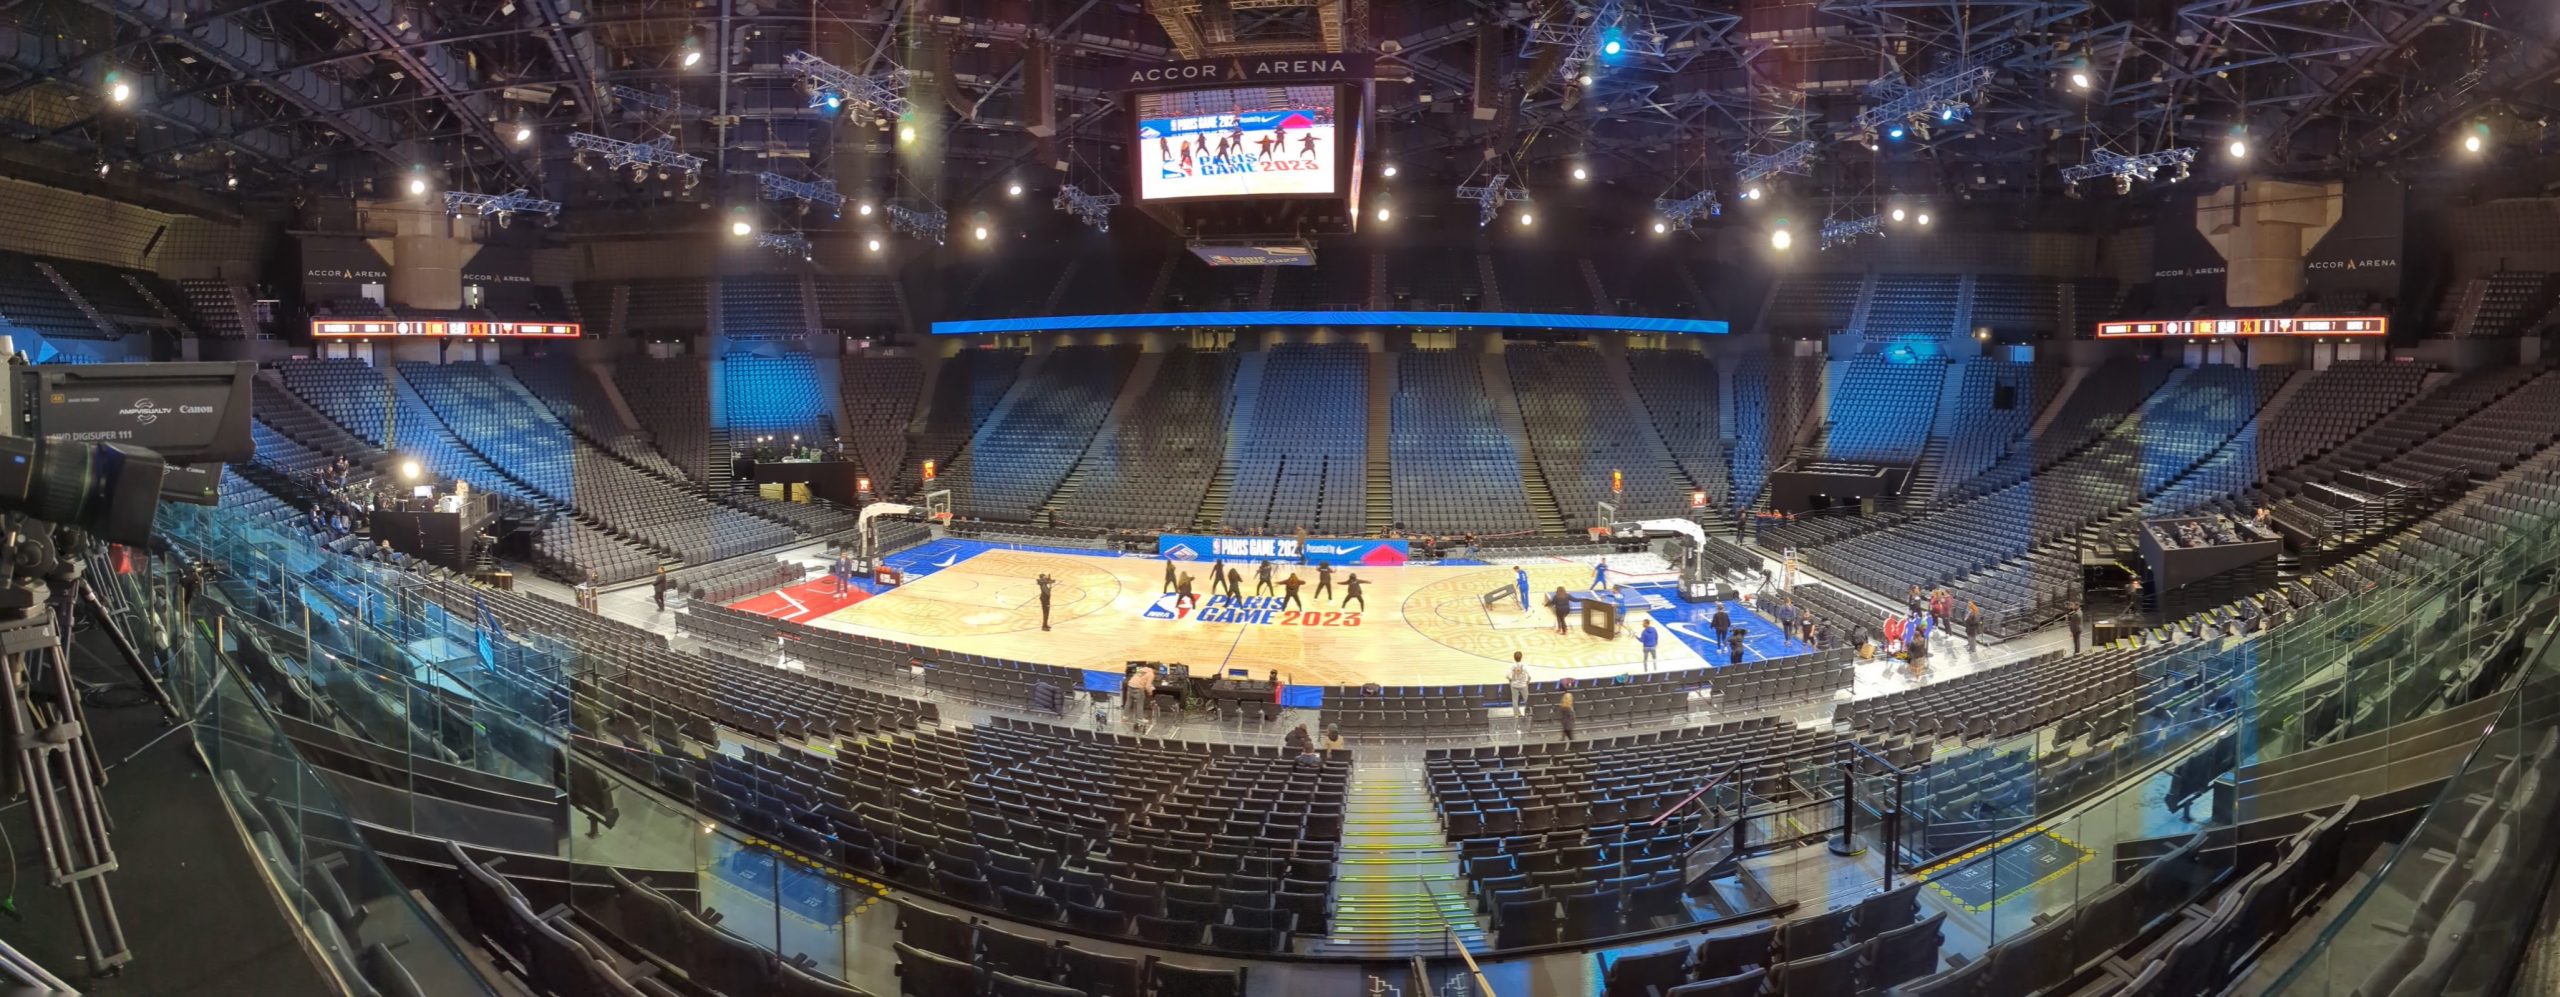 NBA courts remote production success with Bulls v Pistons Paris Game 2023